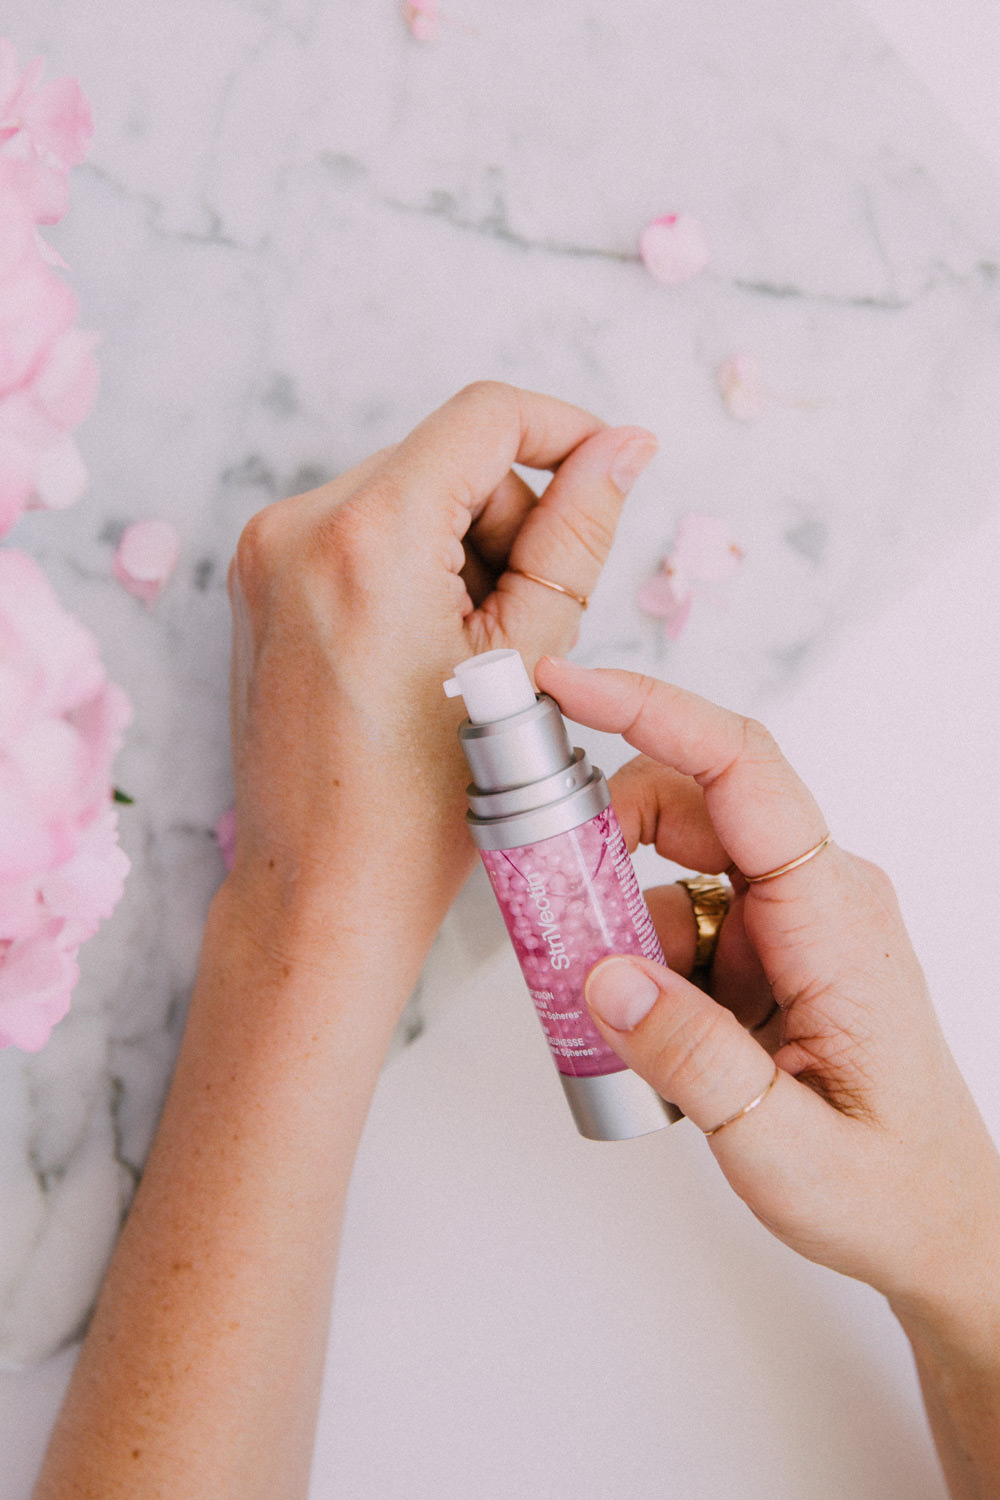 Dash of Daring | StriVectin Active Infusion Youth Serum for healthy skin